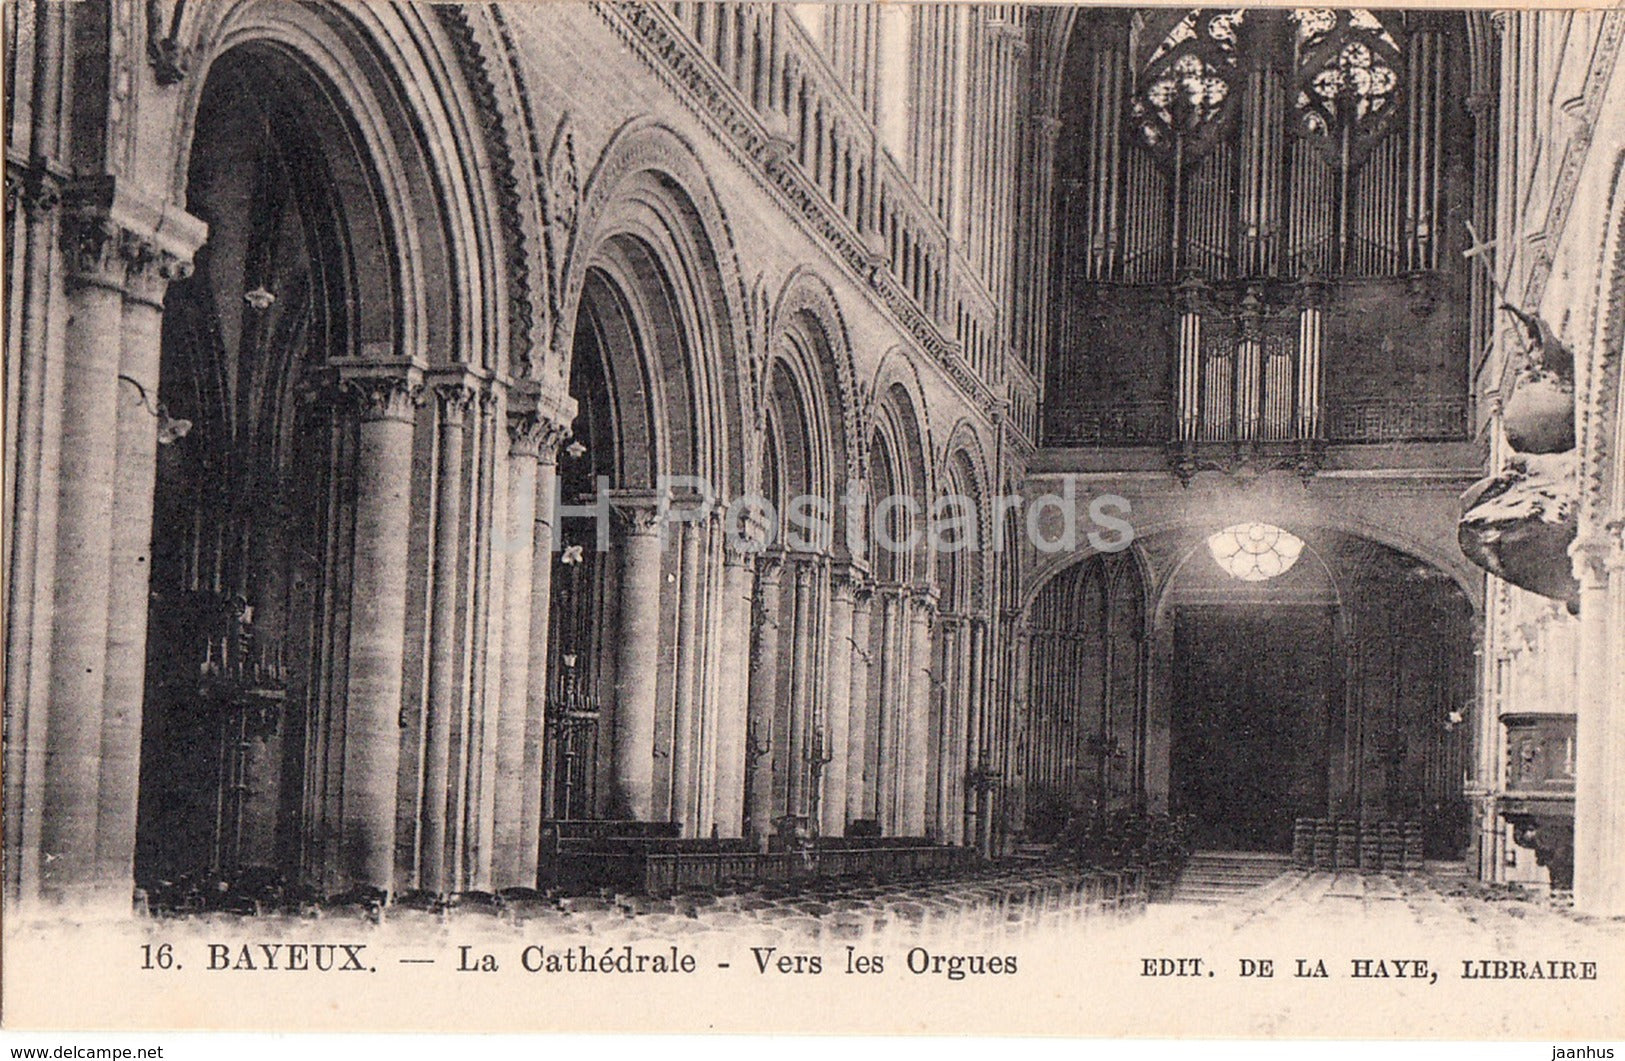 Bayeux - La Cathedrale - Vers les Orgues - 16 - cathedral - old postcard - France - unused